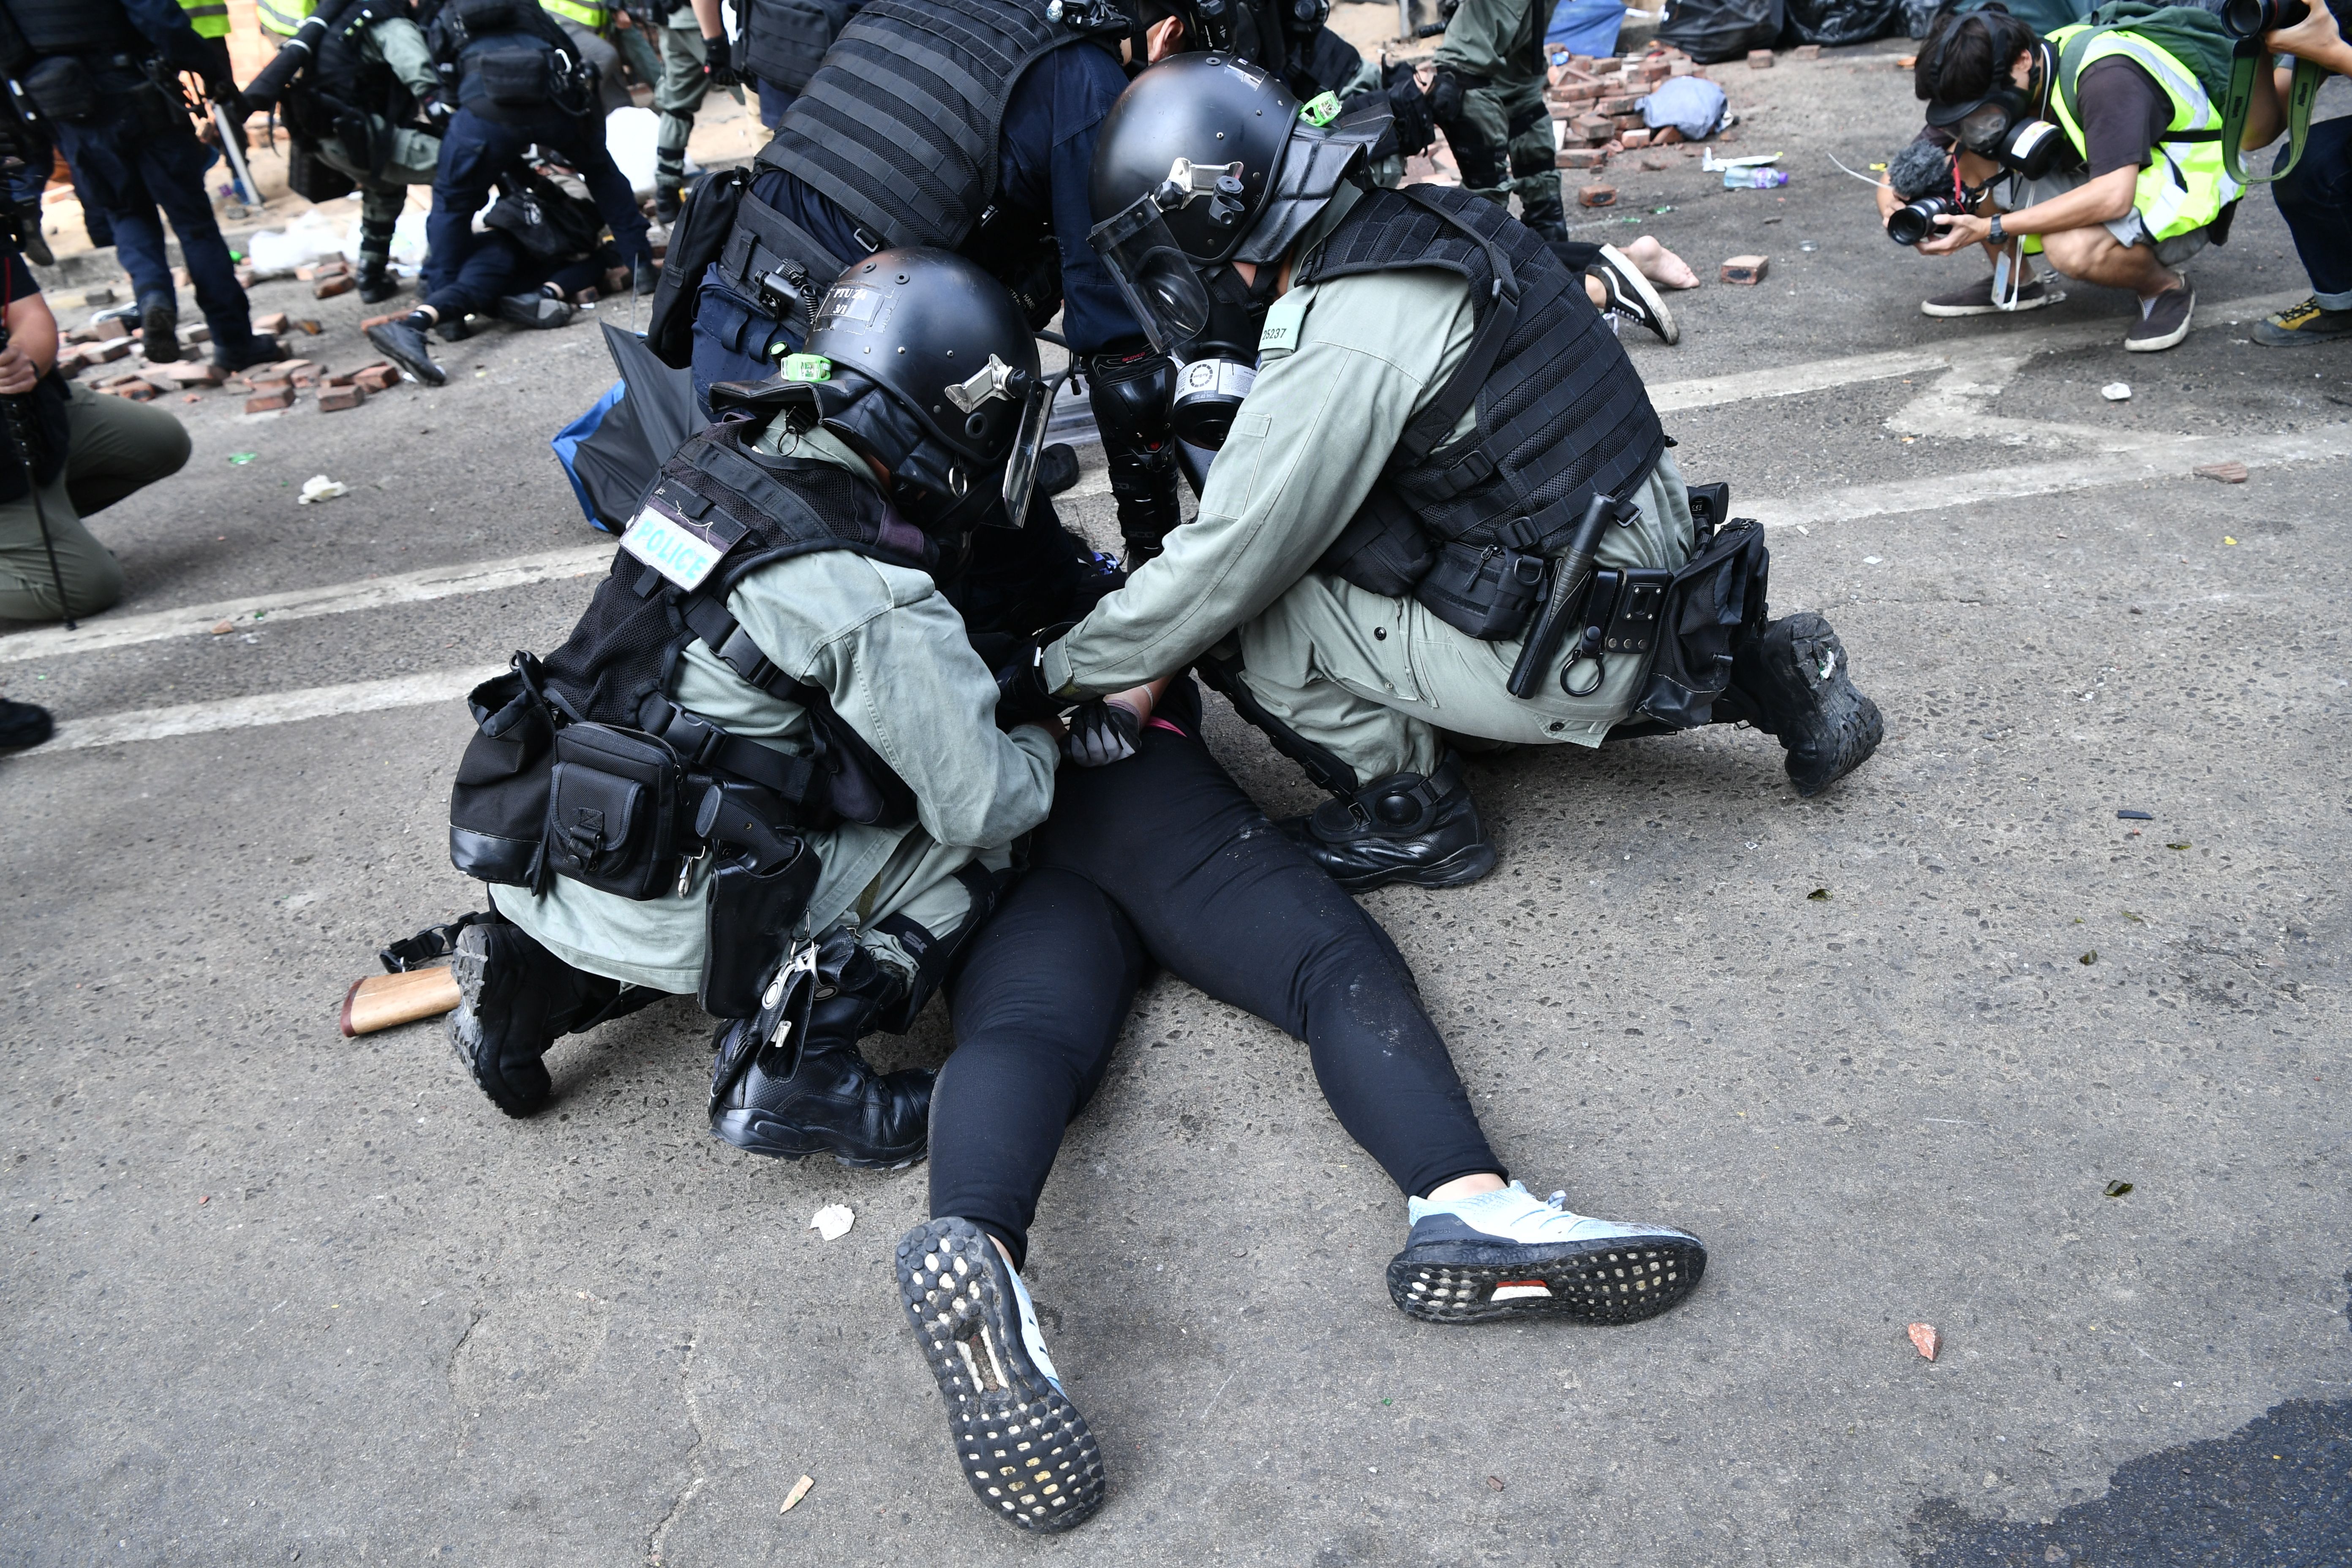 Police tackle protesters near the Hong Kong Polytechnic University on November 18, 2019.